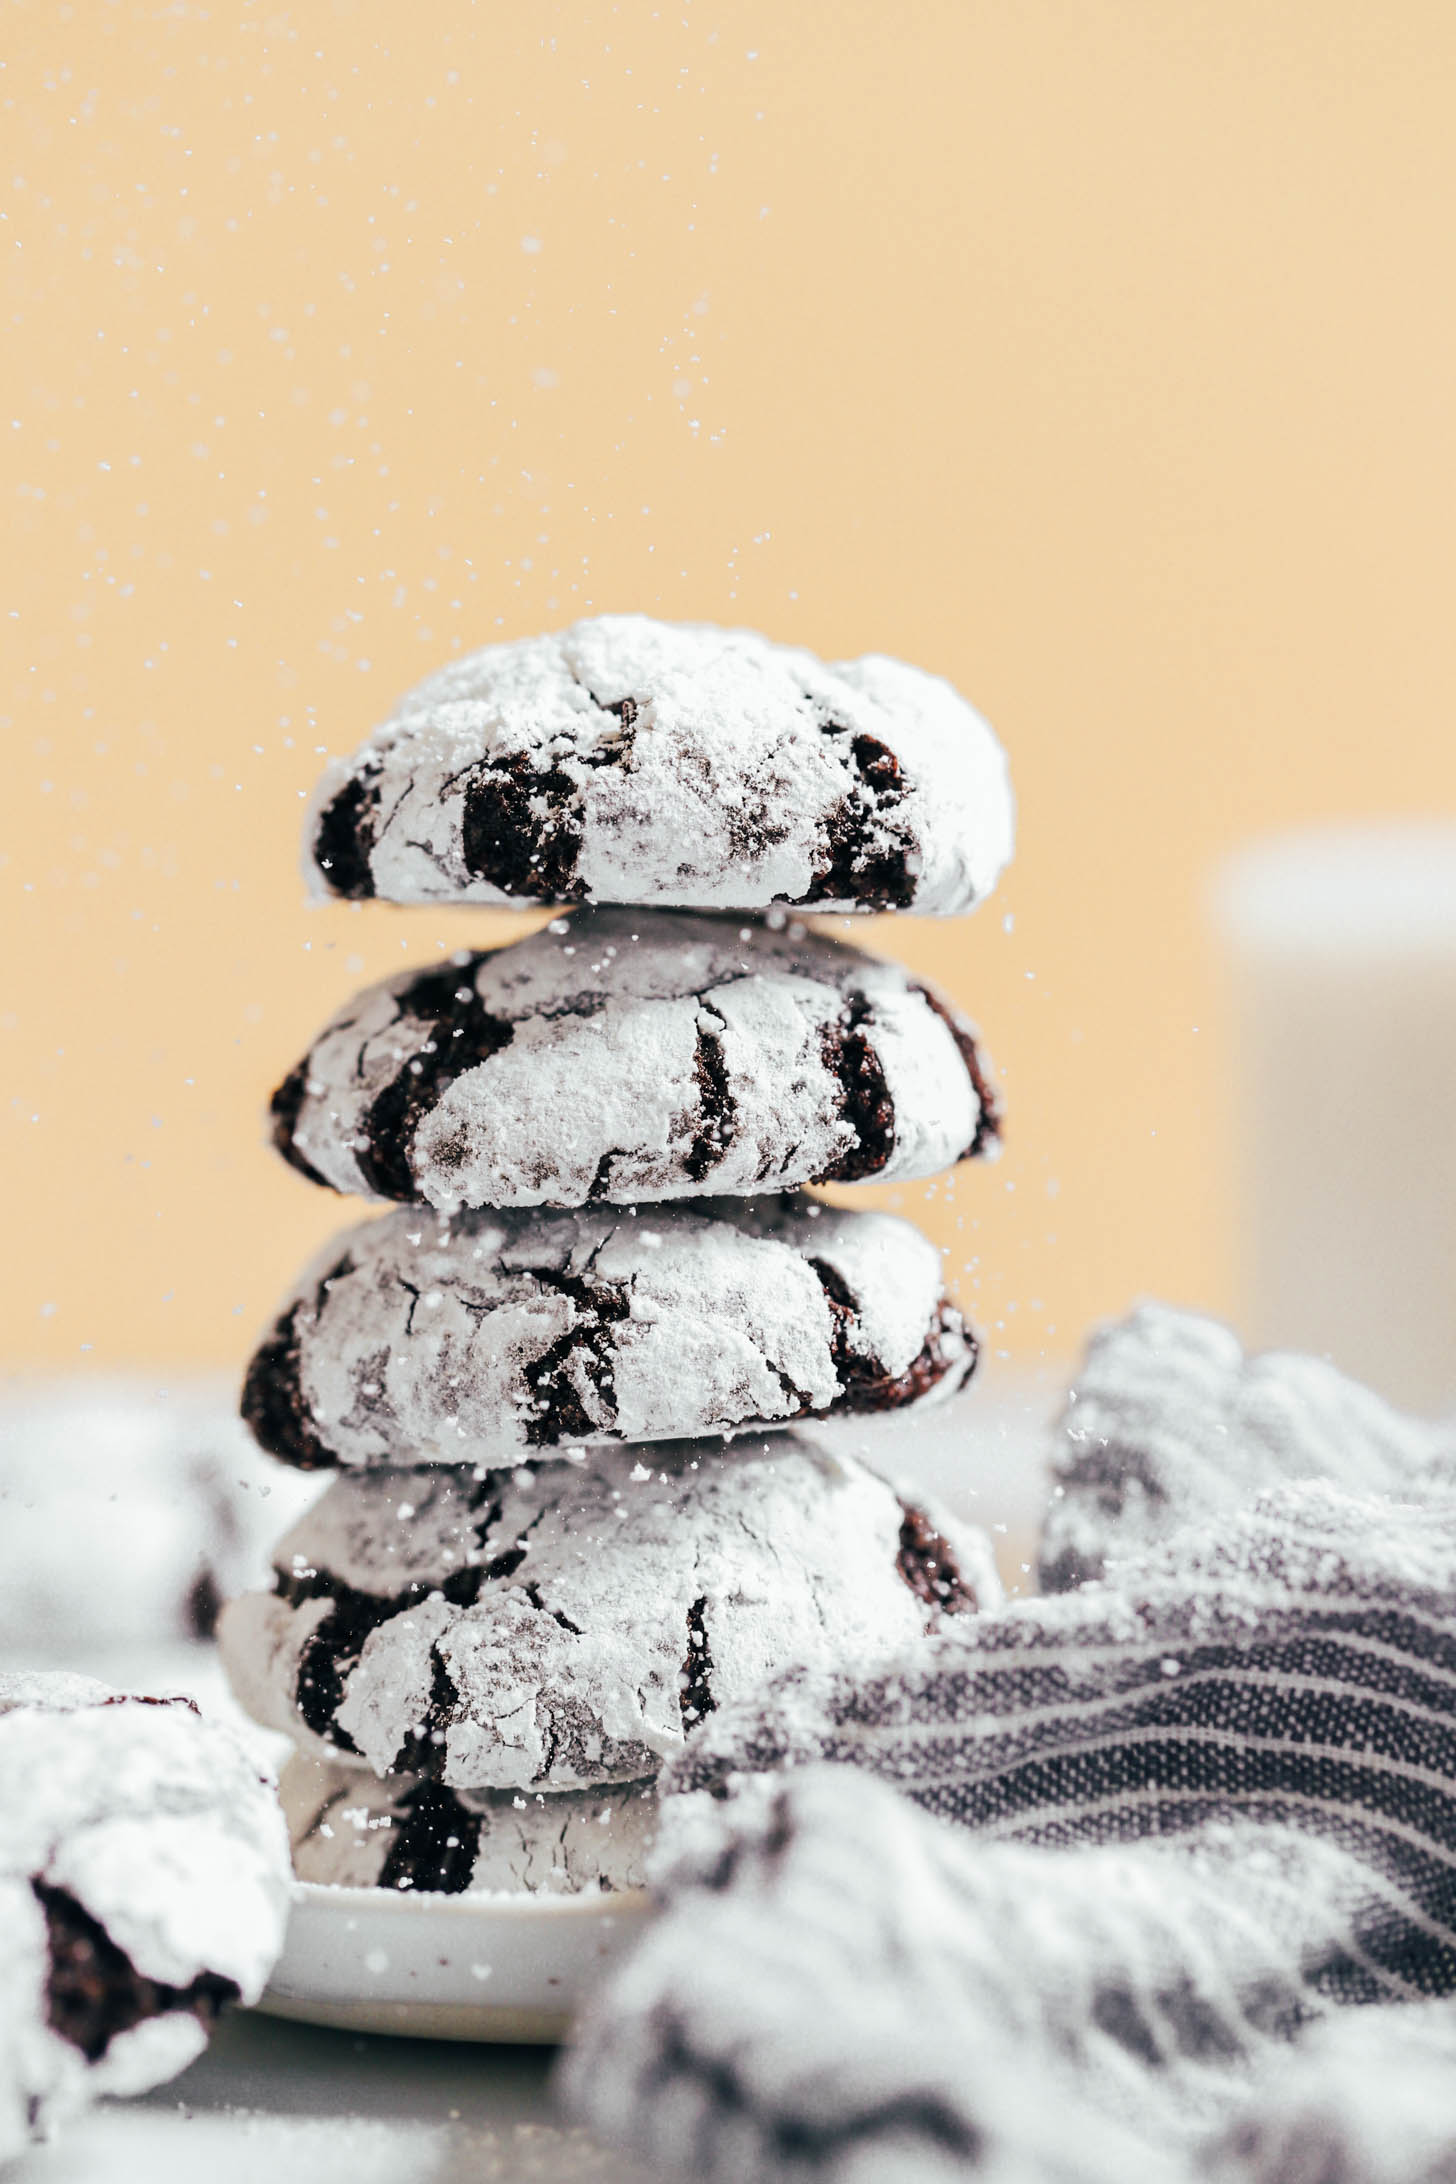 Powdered sugar raining down on a stack of chocolate crinkle cookies